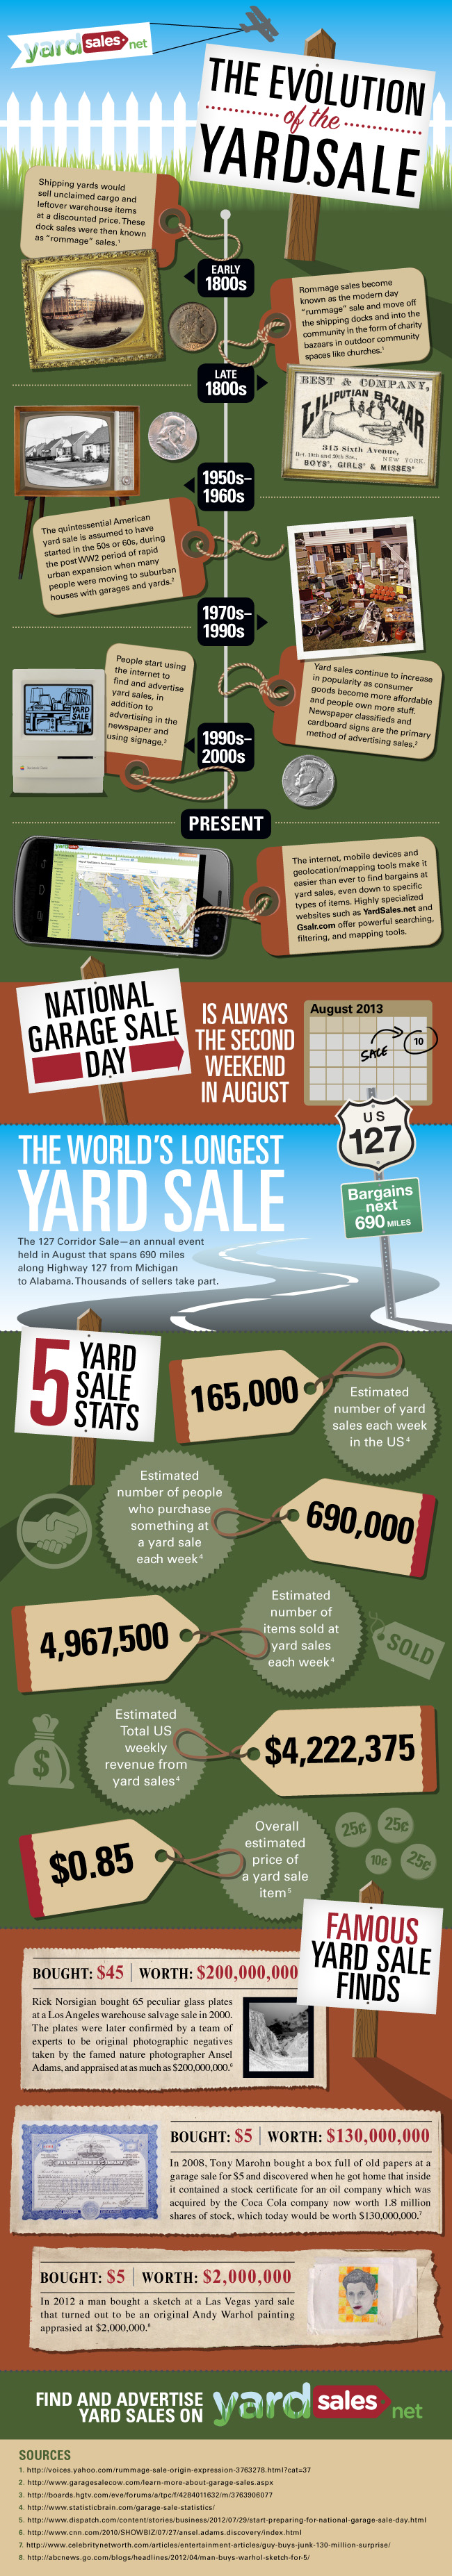 The Evolution of the Yard Sale